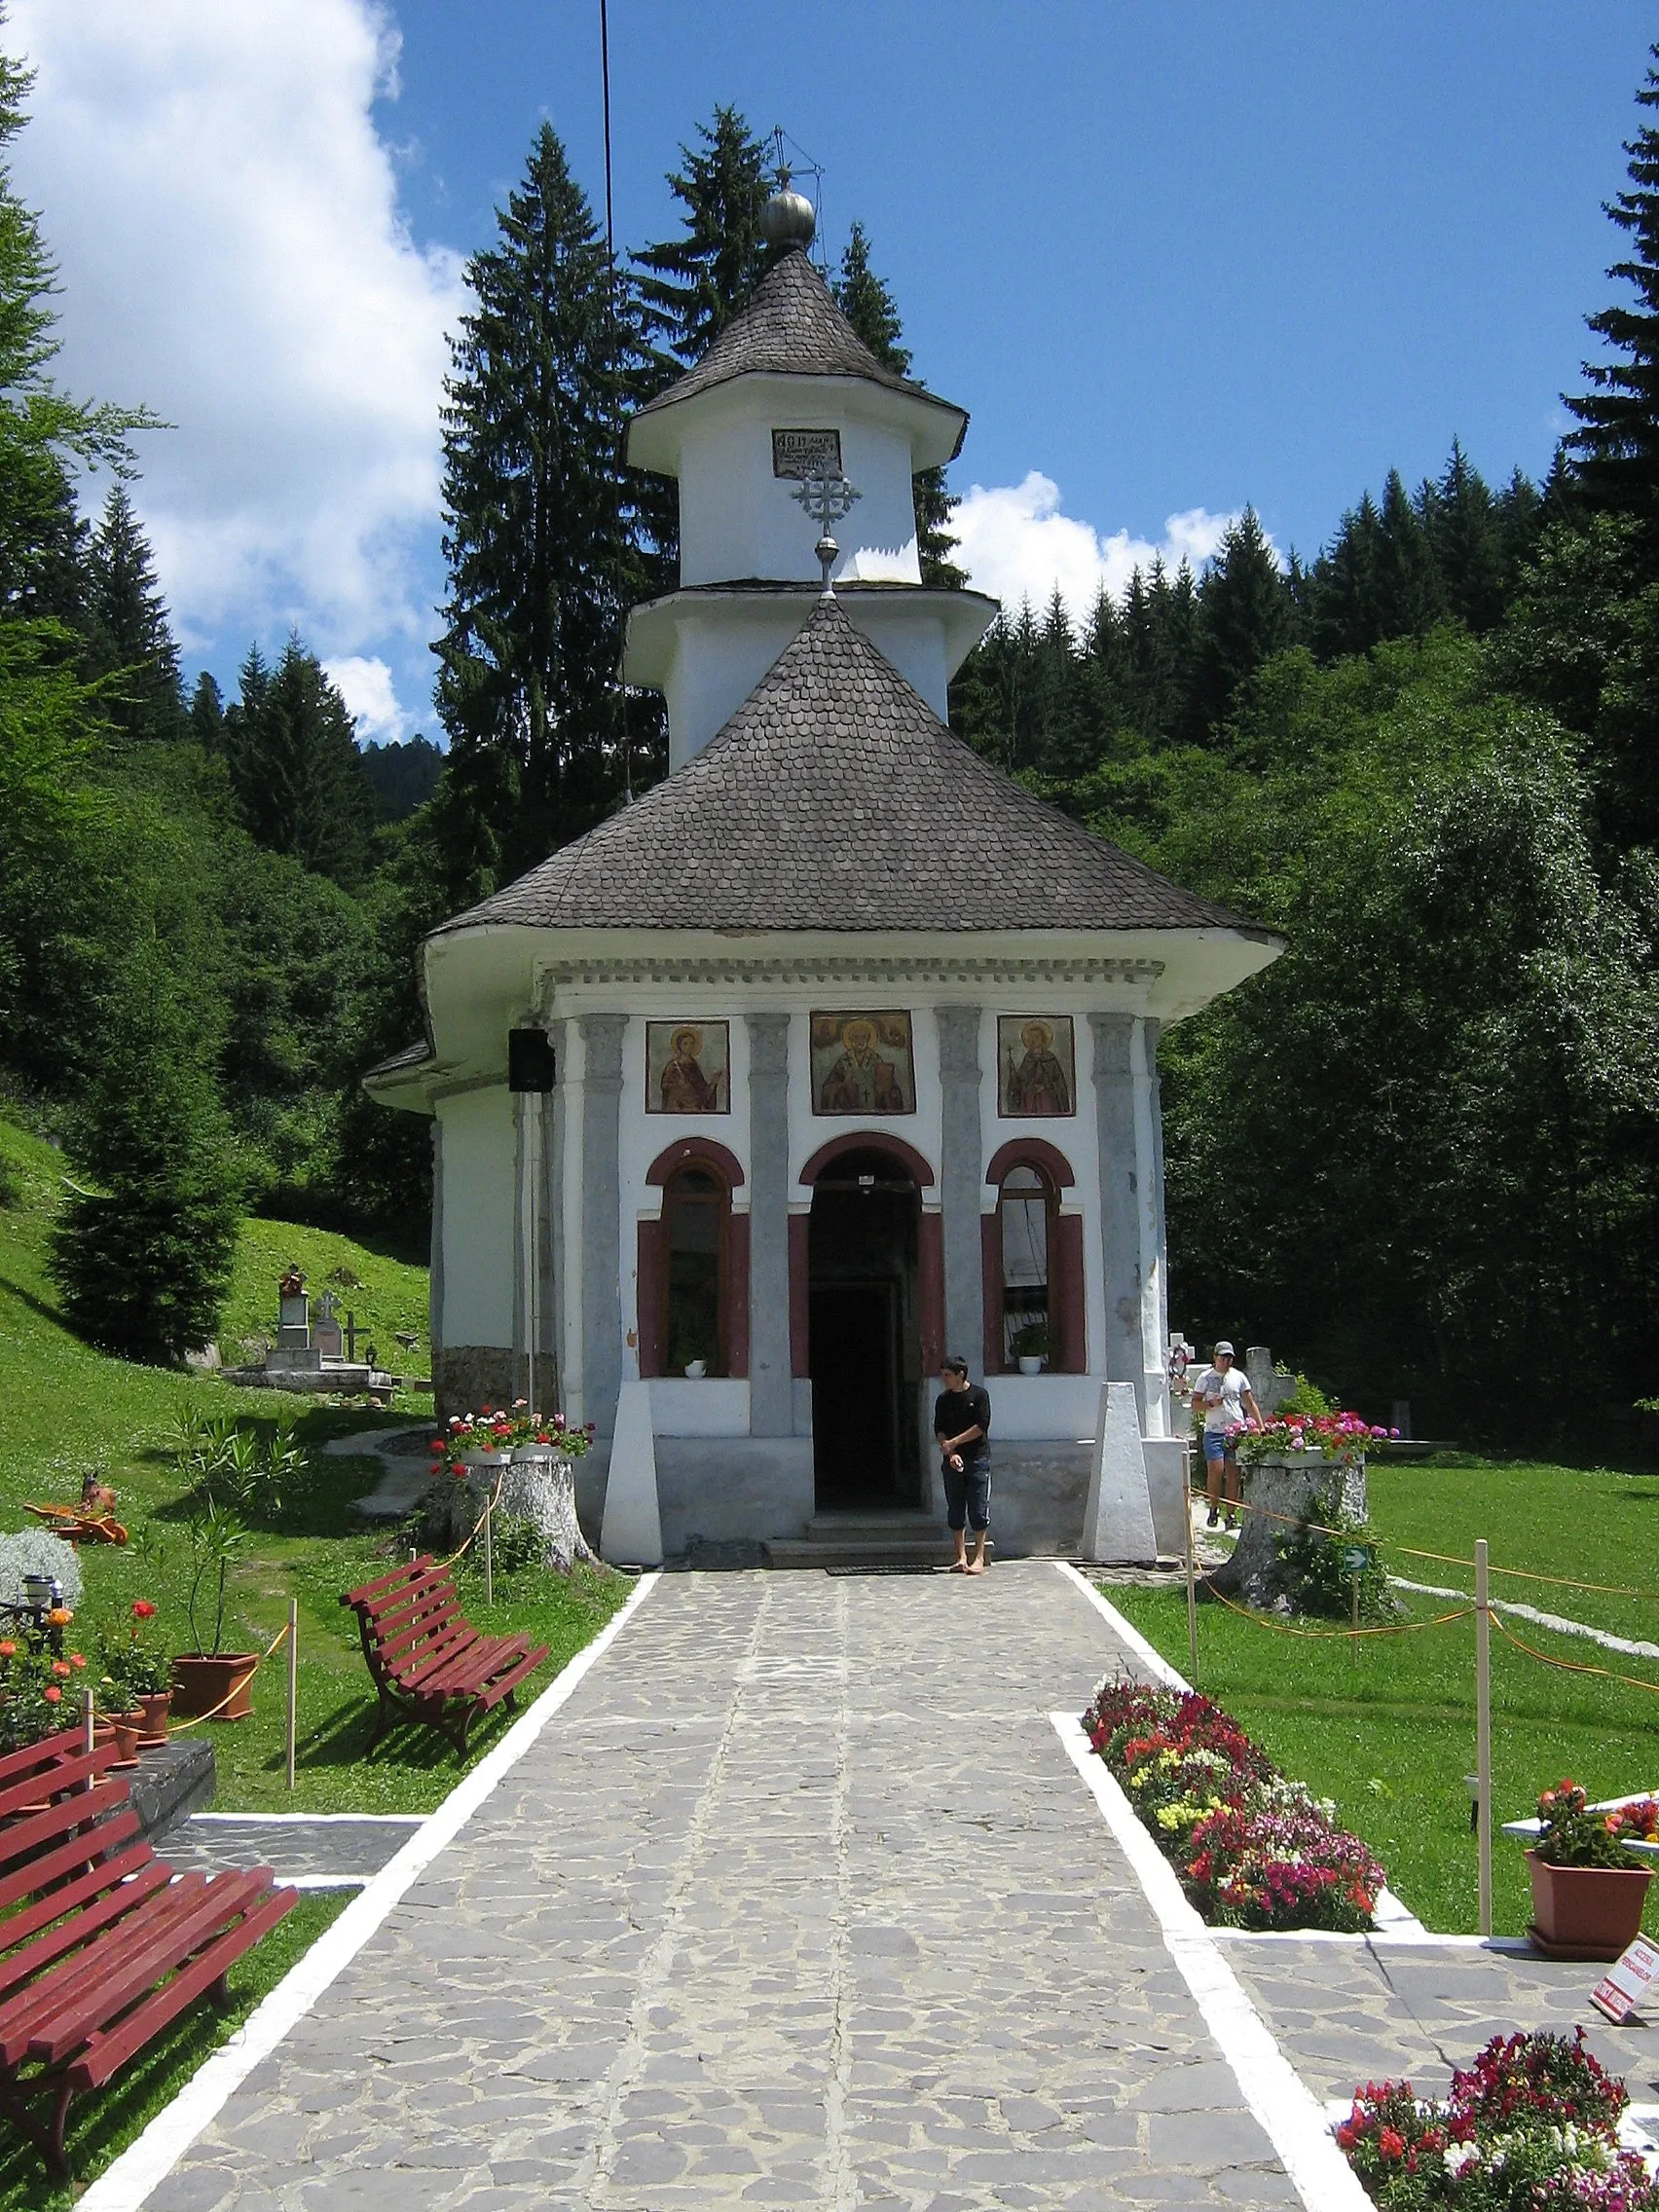 Photo showing: A small, secluded eighteenth century orthodox monastery (now a nunnery), it is the place to go if you are looking for an old church where you can be alone with the icons and the cross - a place for a little solitude and meditation.
The mural painting in the charming little church is not so well preserved, but its patina can make you feel like you are in a time long, long ago.

The nice nun at the door graciously allowed me to take pictures inside the church.